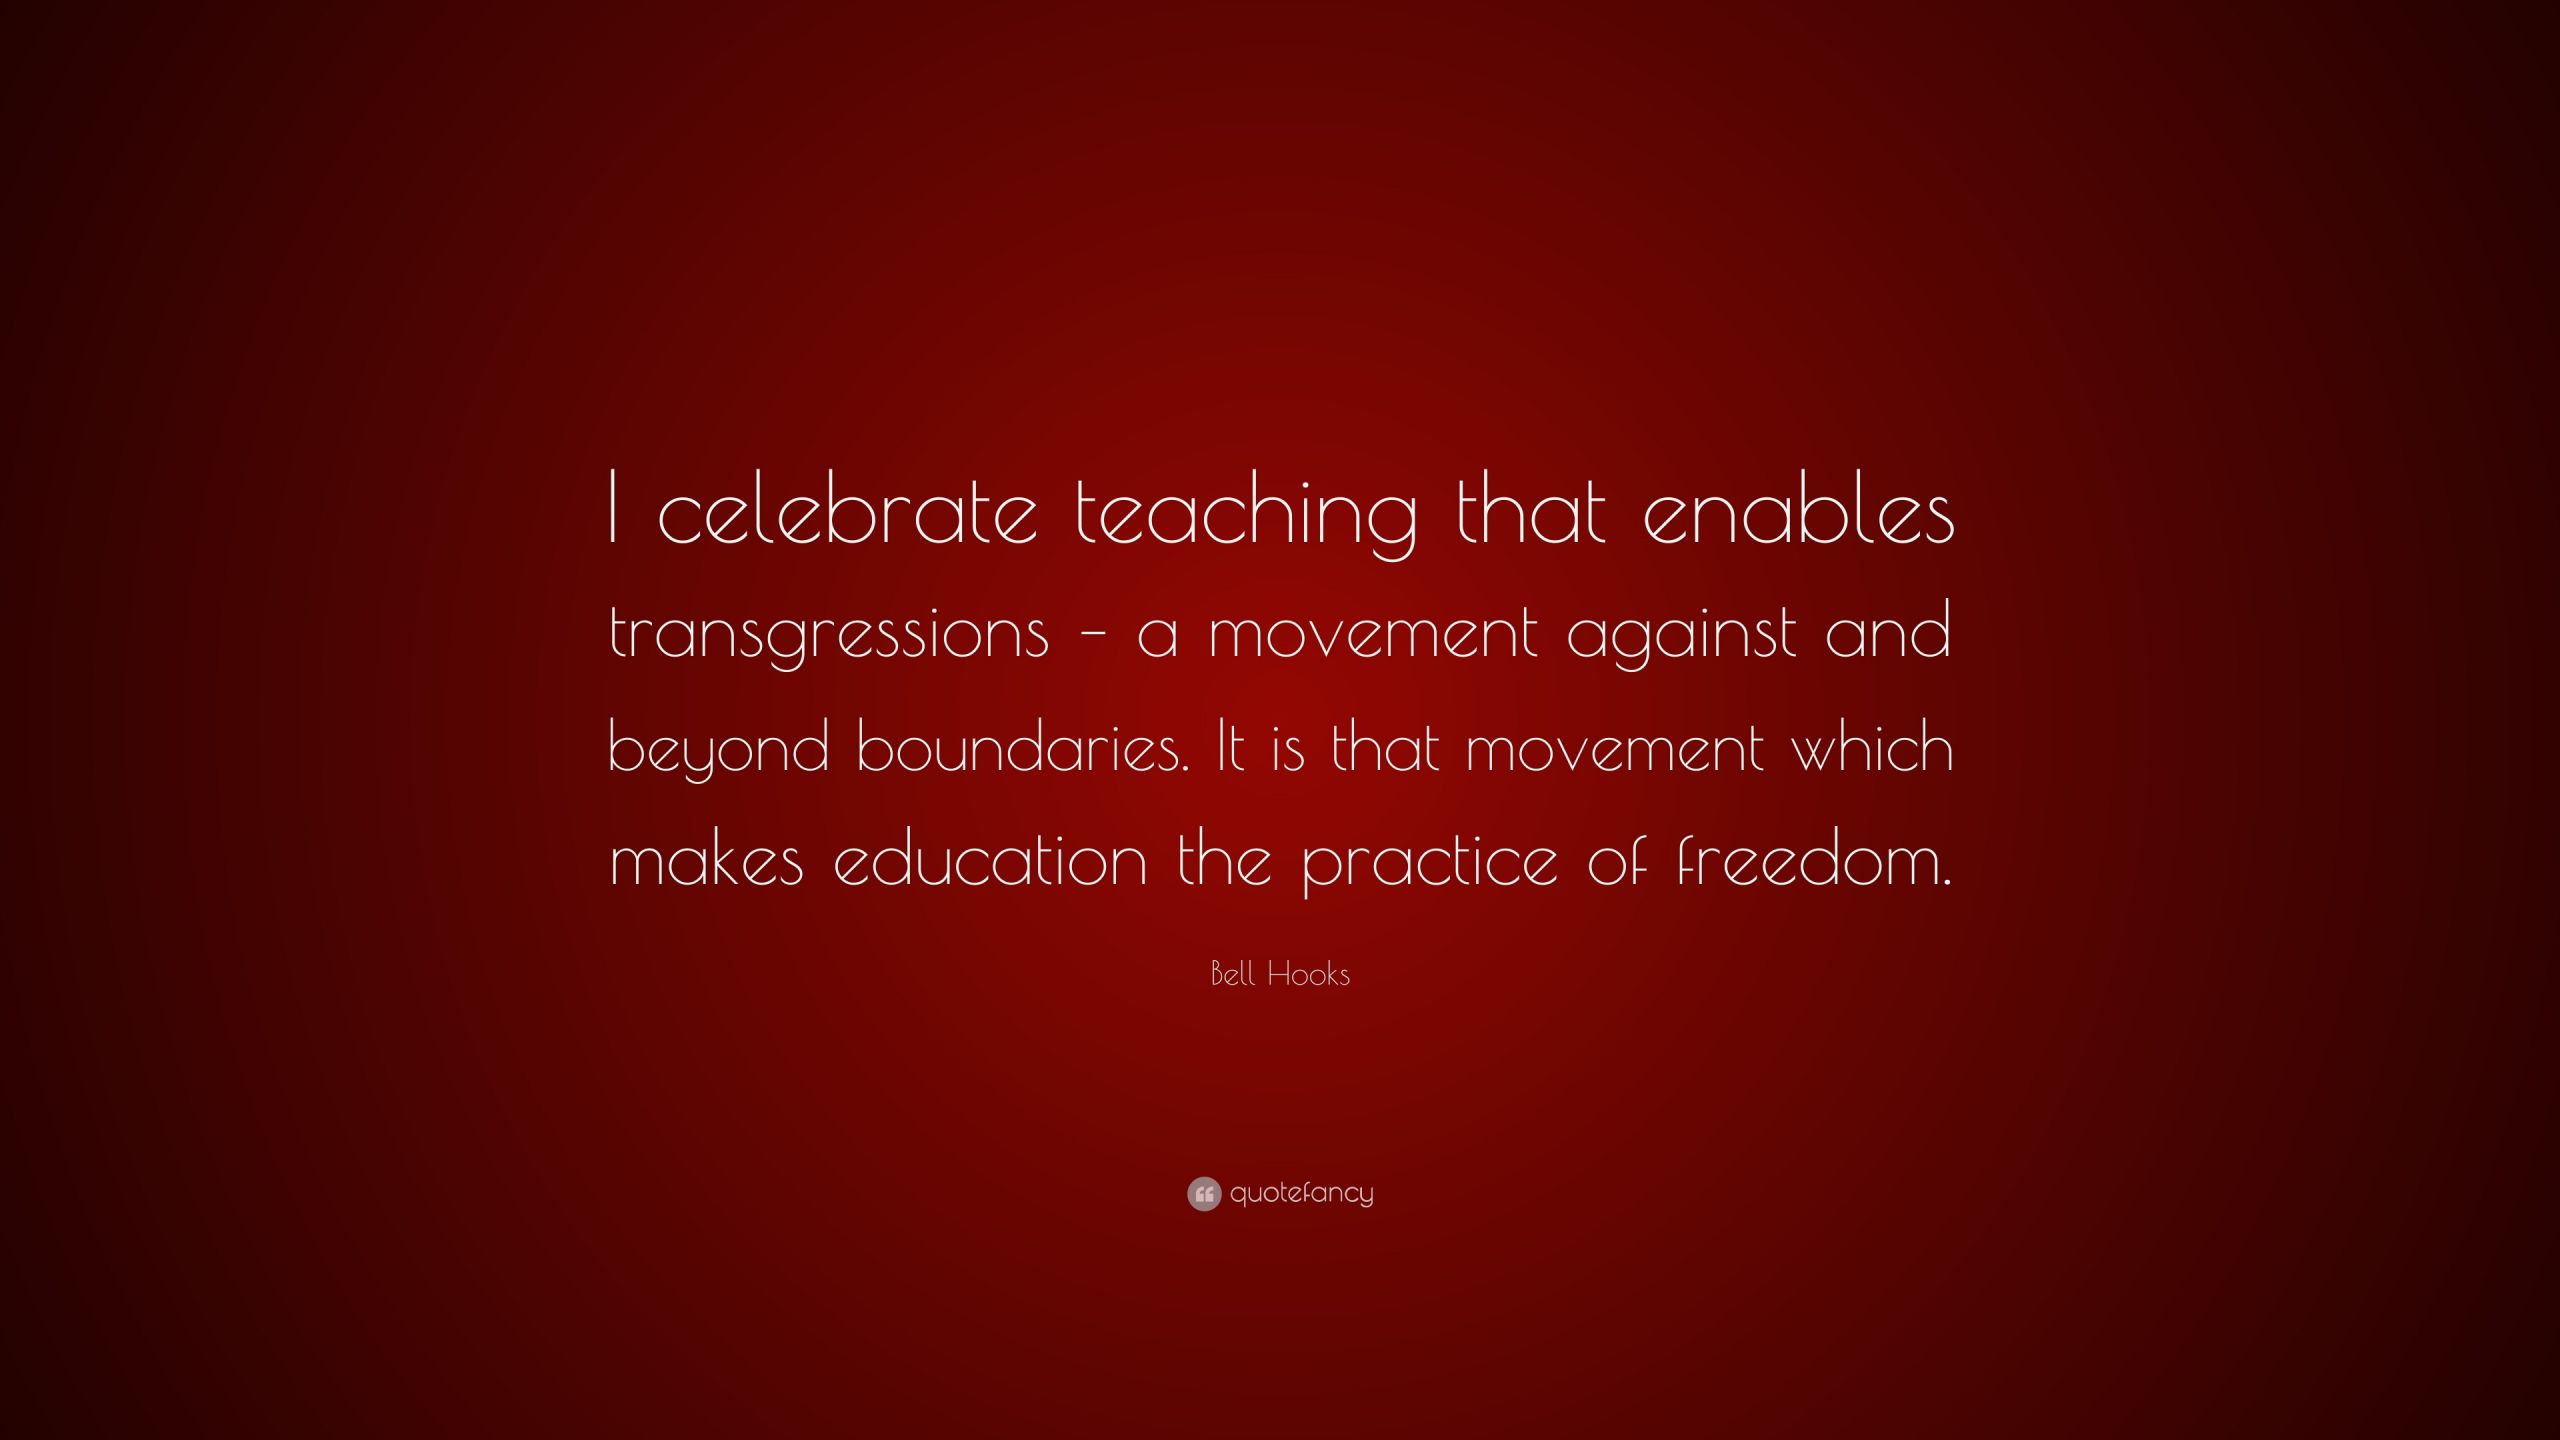 Bell Hooks Quotes Education
 Bell Hooks Quote “I celebrate teaching that enables